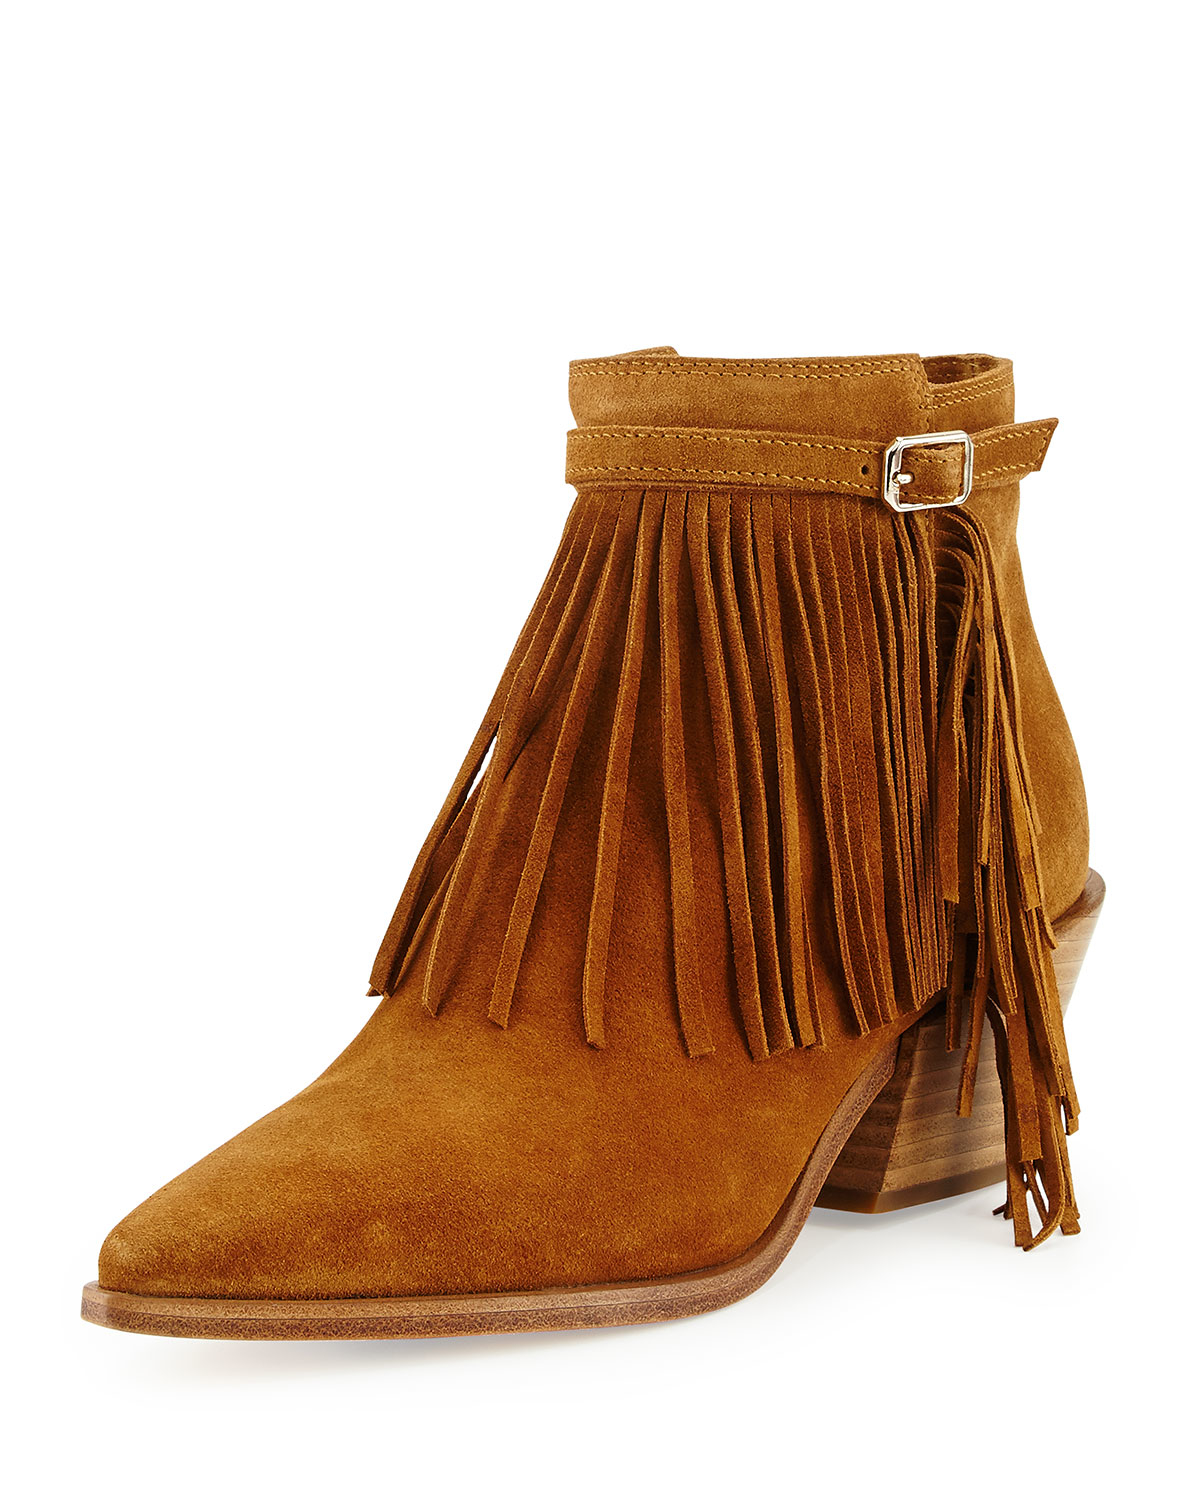 Sigerson morrison Lena Fringed Suede Ankle Boots in Black | Lyst